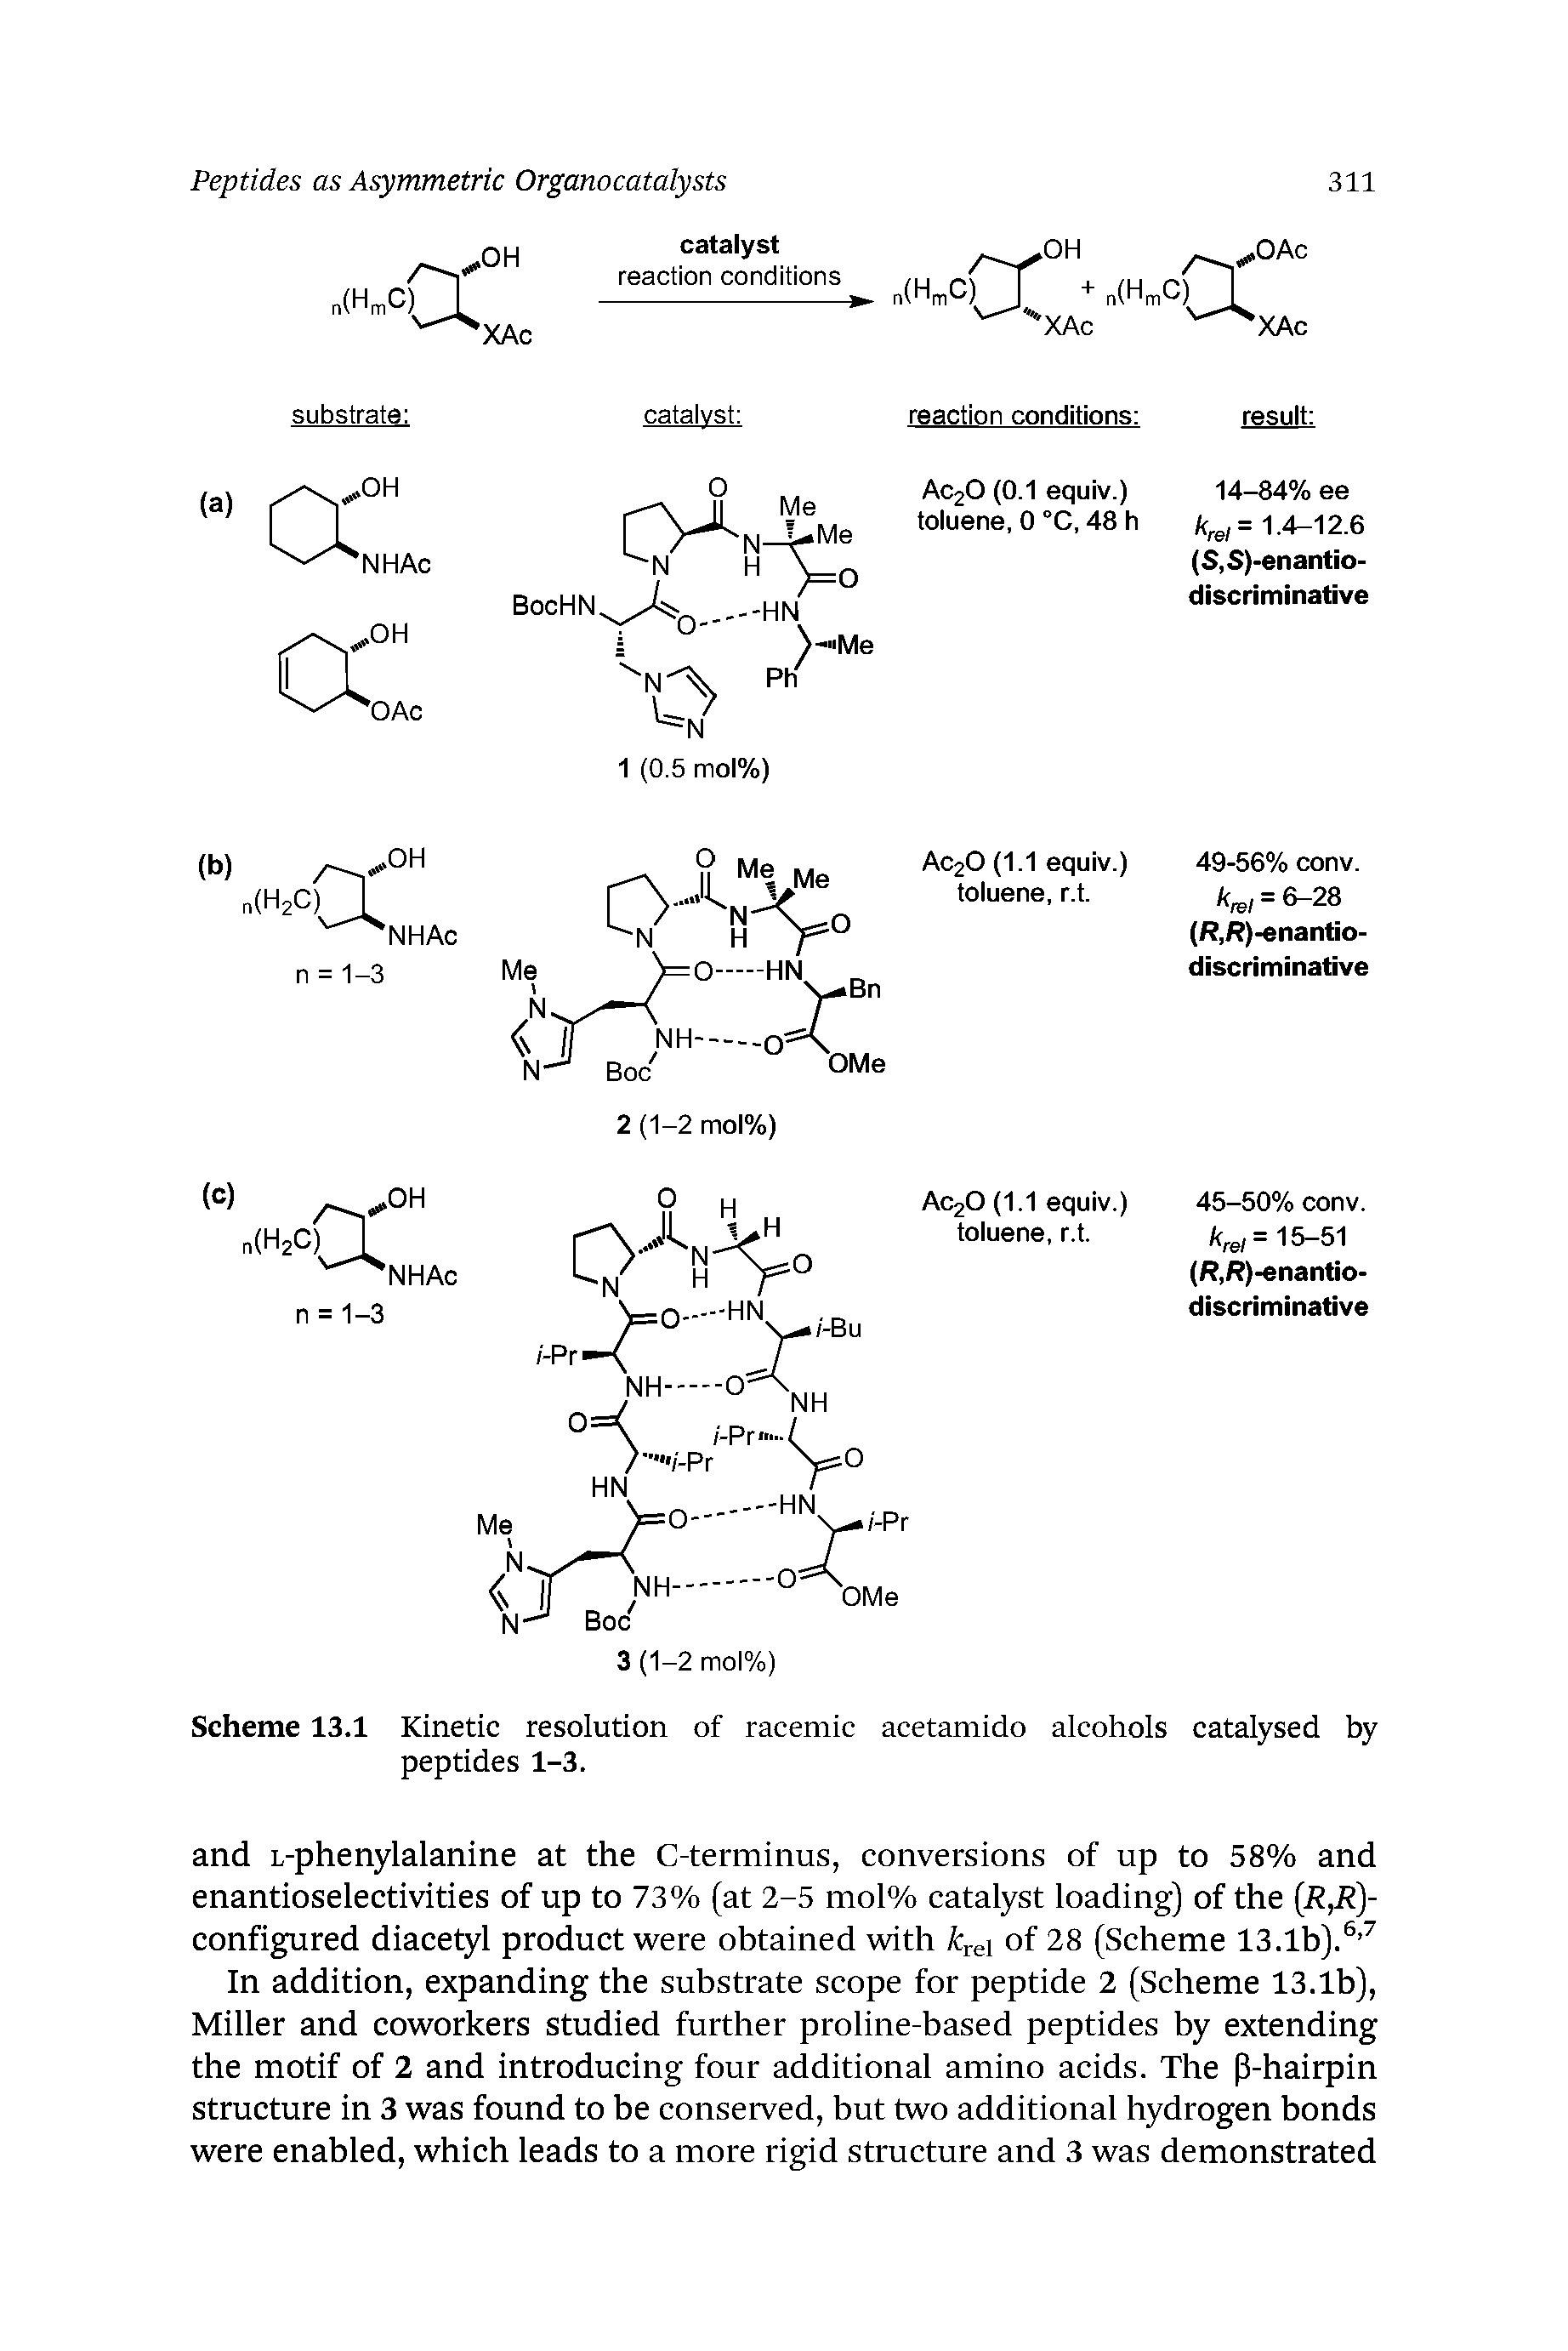 Scheme 13.1 Kinetic resolution of racemic acetamido alcohols catalysed by peptides 1-3.